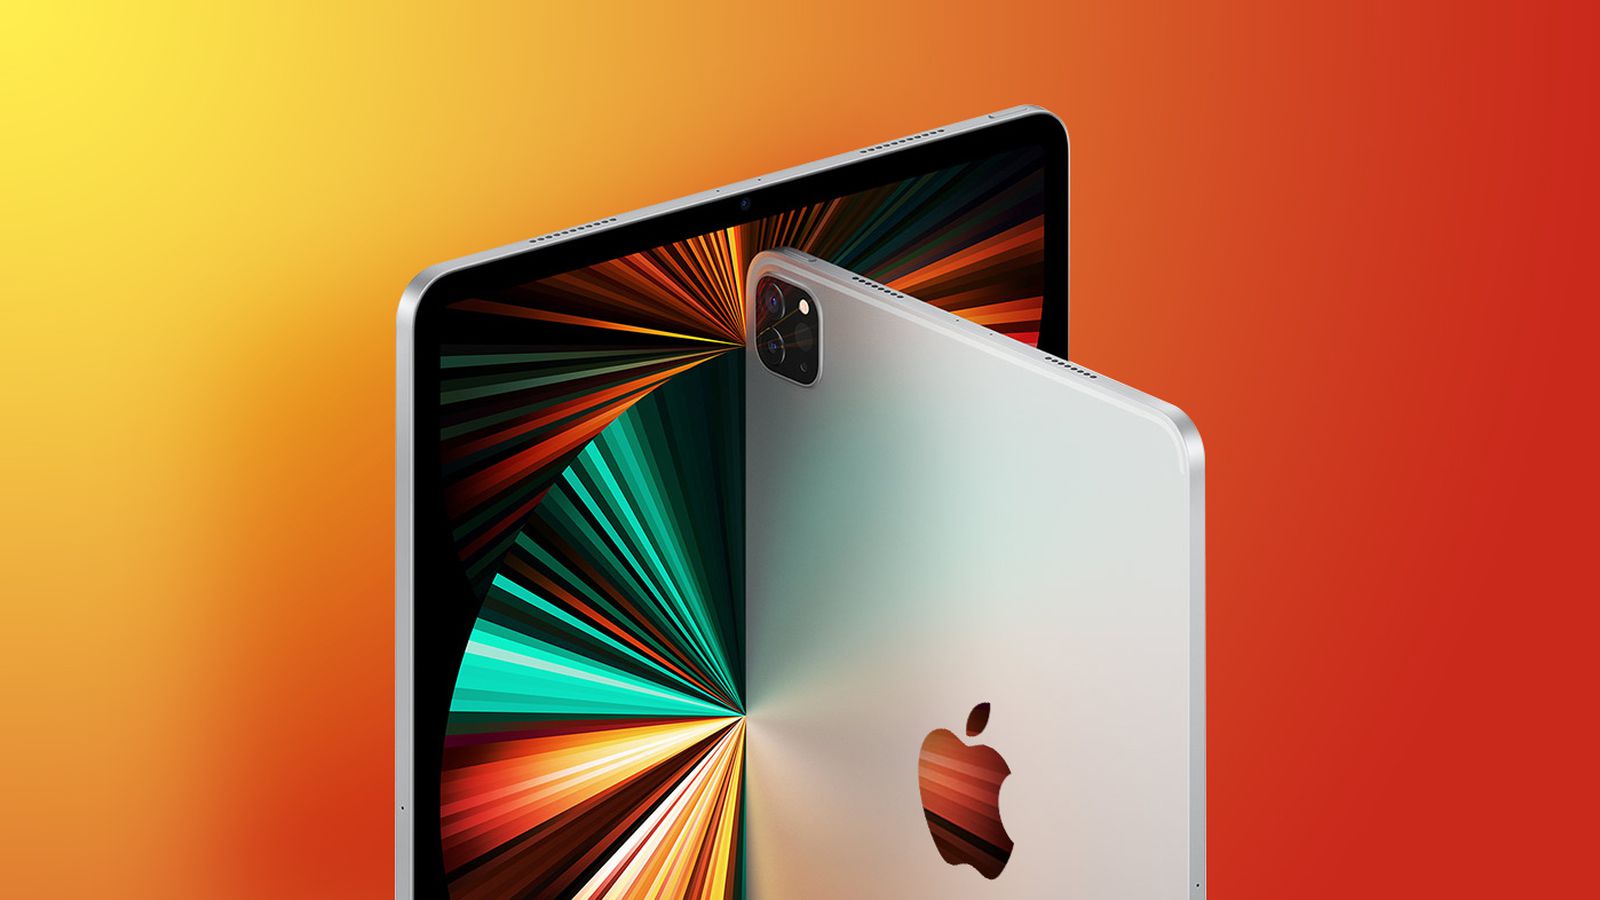 Gurman: New M2 iPad Pro Models to Be Announced 'In a Matter of Days'